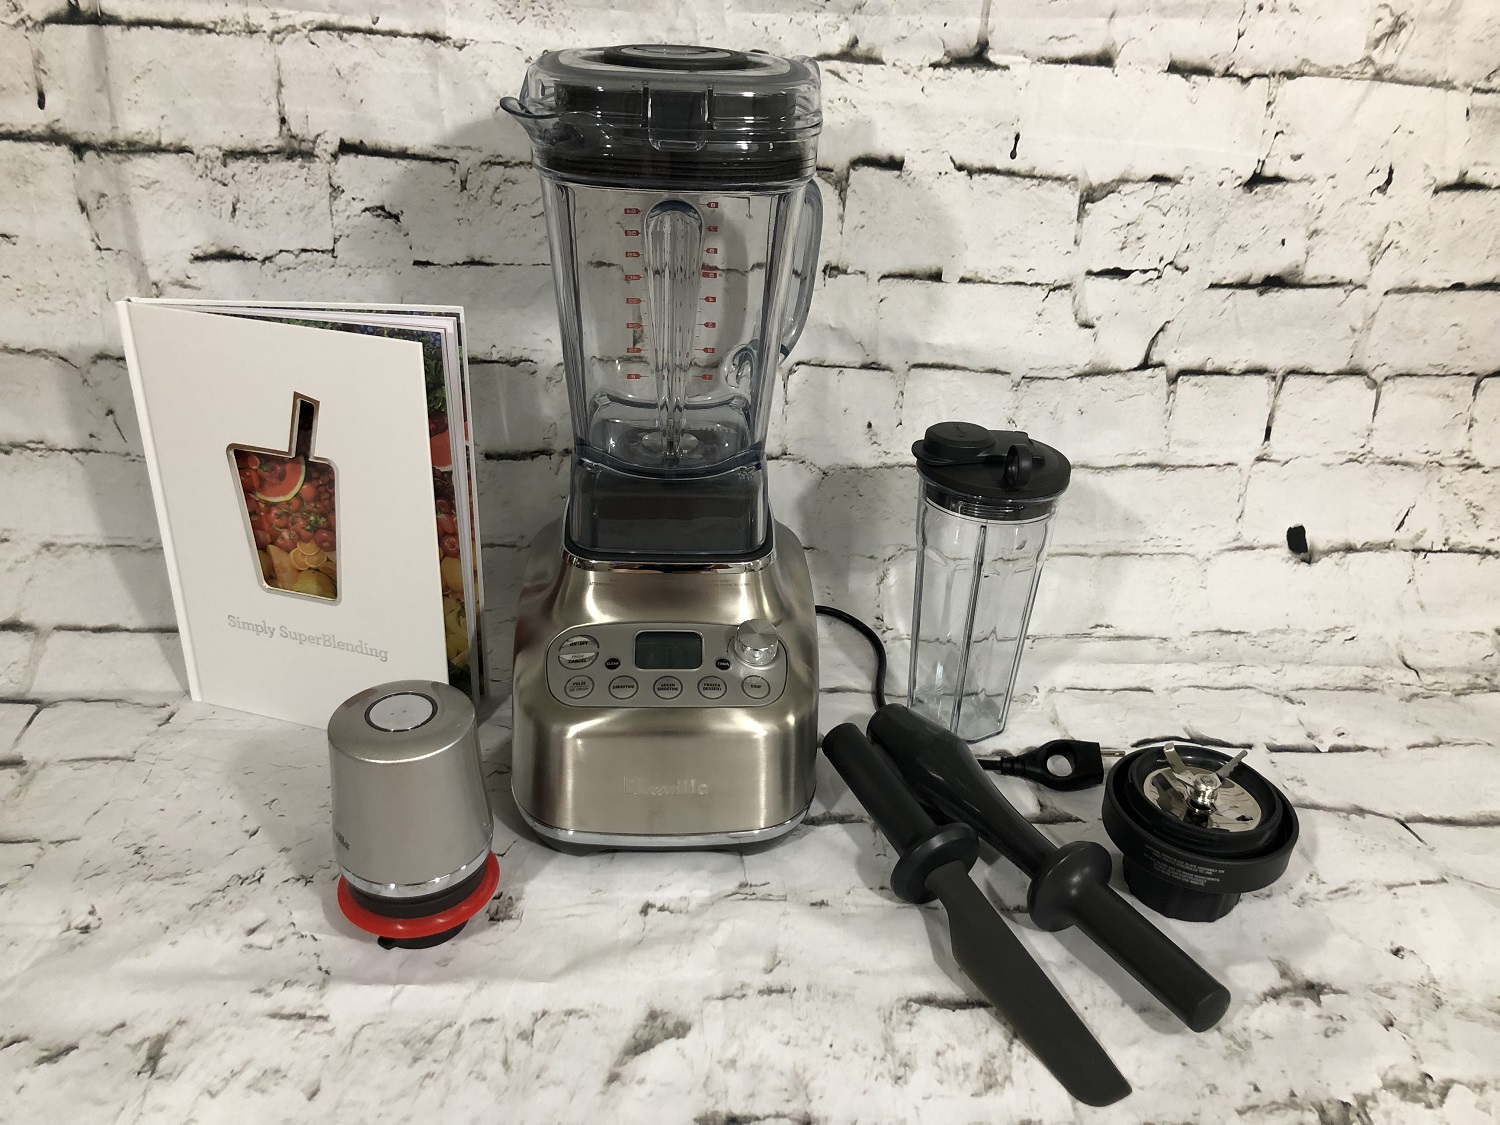 Breville Super Q Blender Review: A Powerful Addition to Your Kitchen